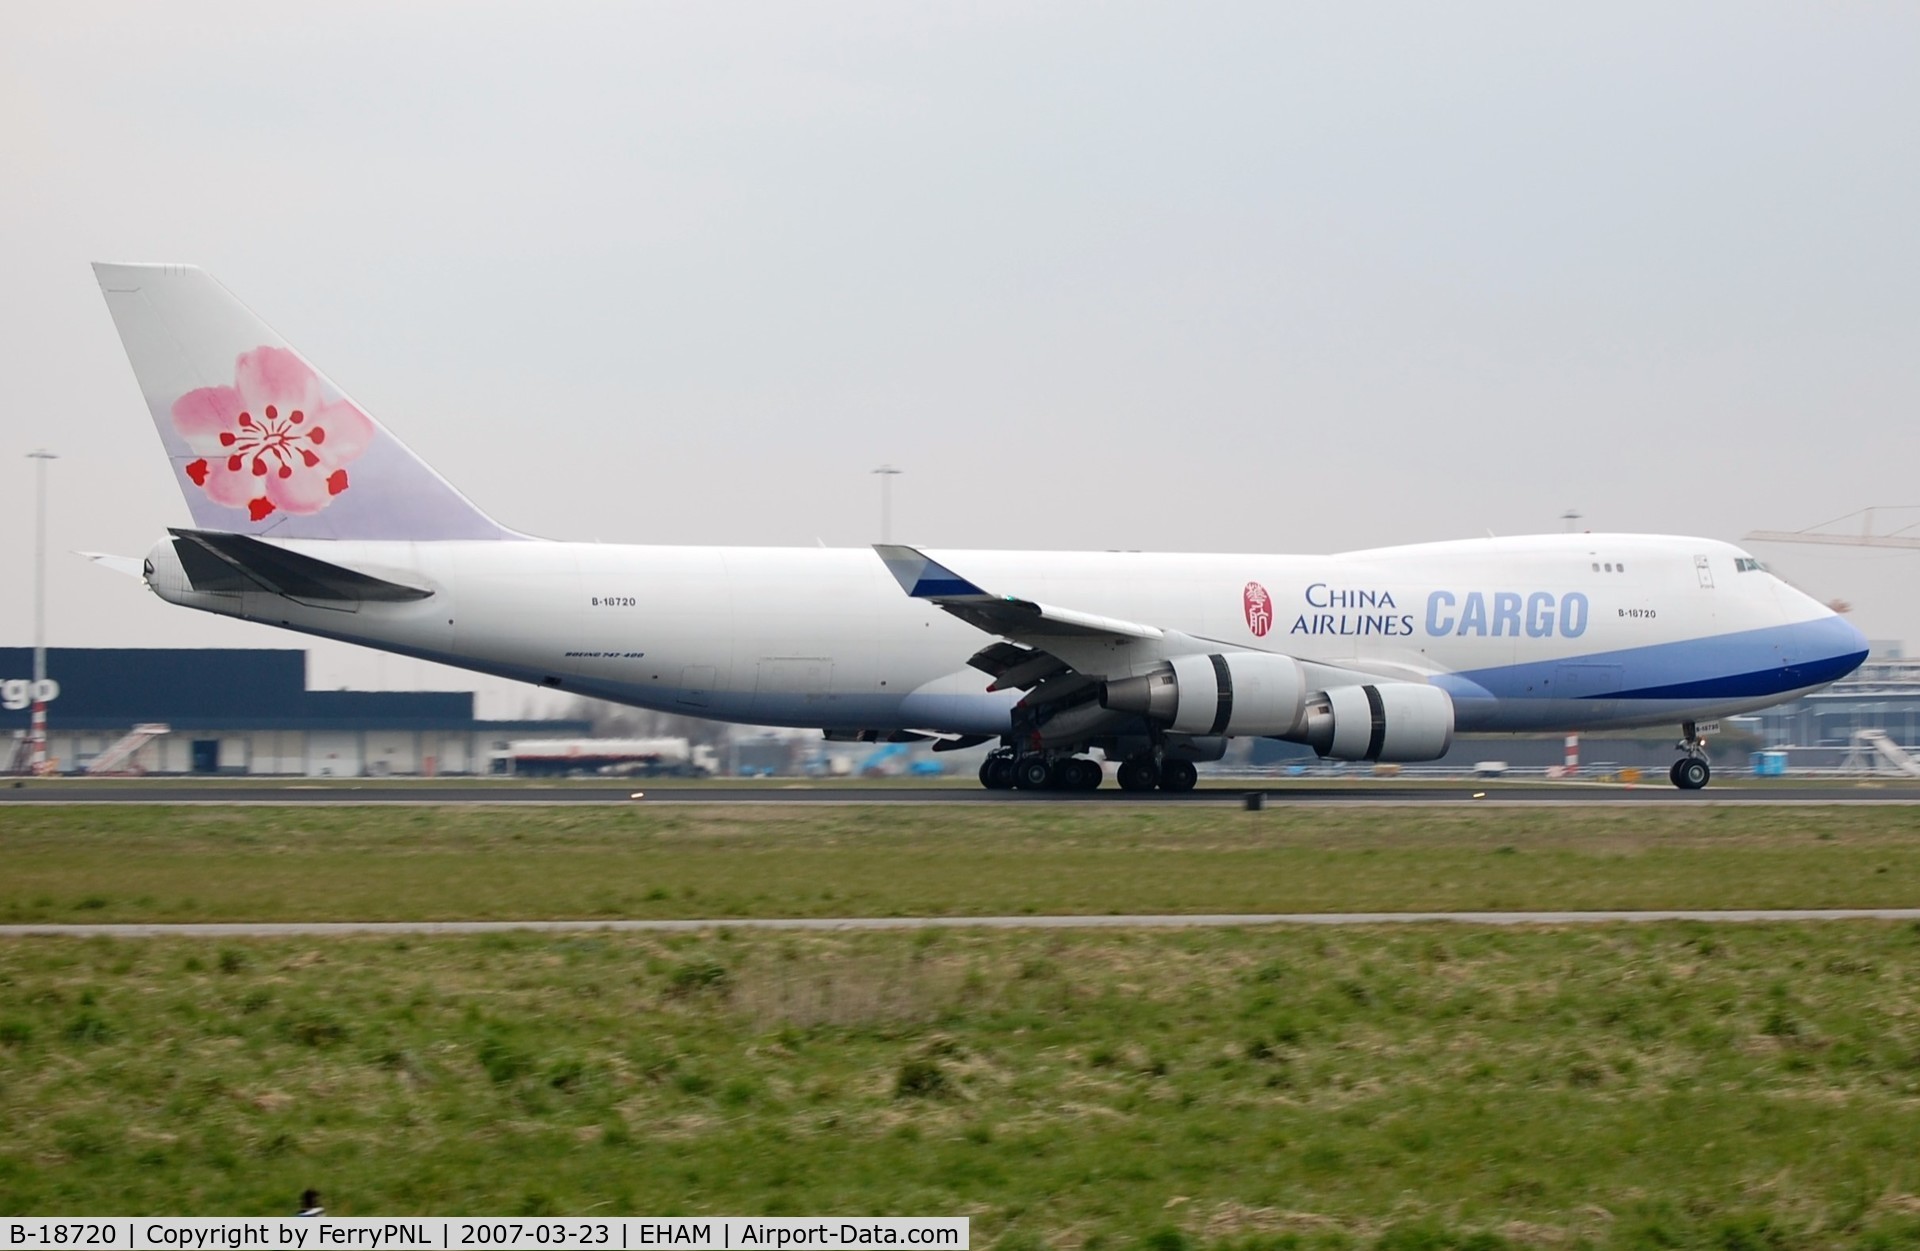 B-18720, 2005 Boeing 747-409F/SCD C/N 33733, Arrival of China Cargo B744.